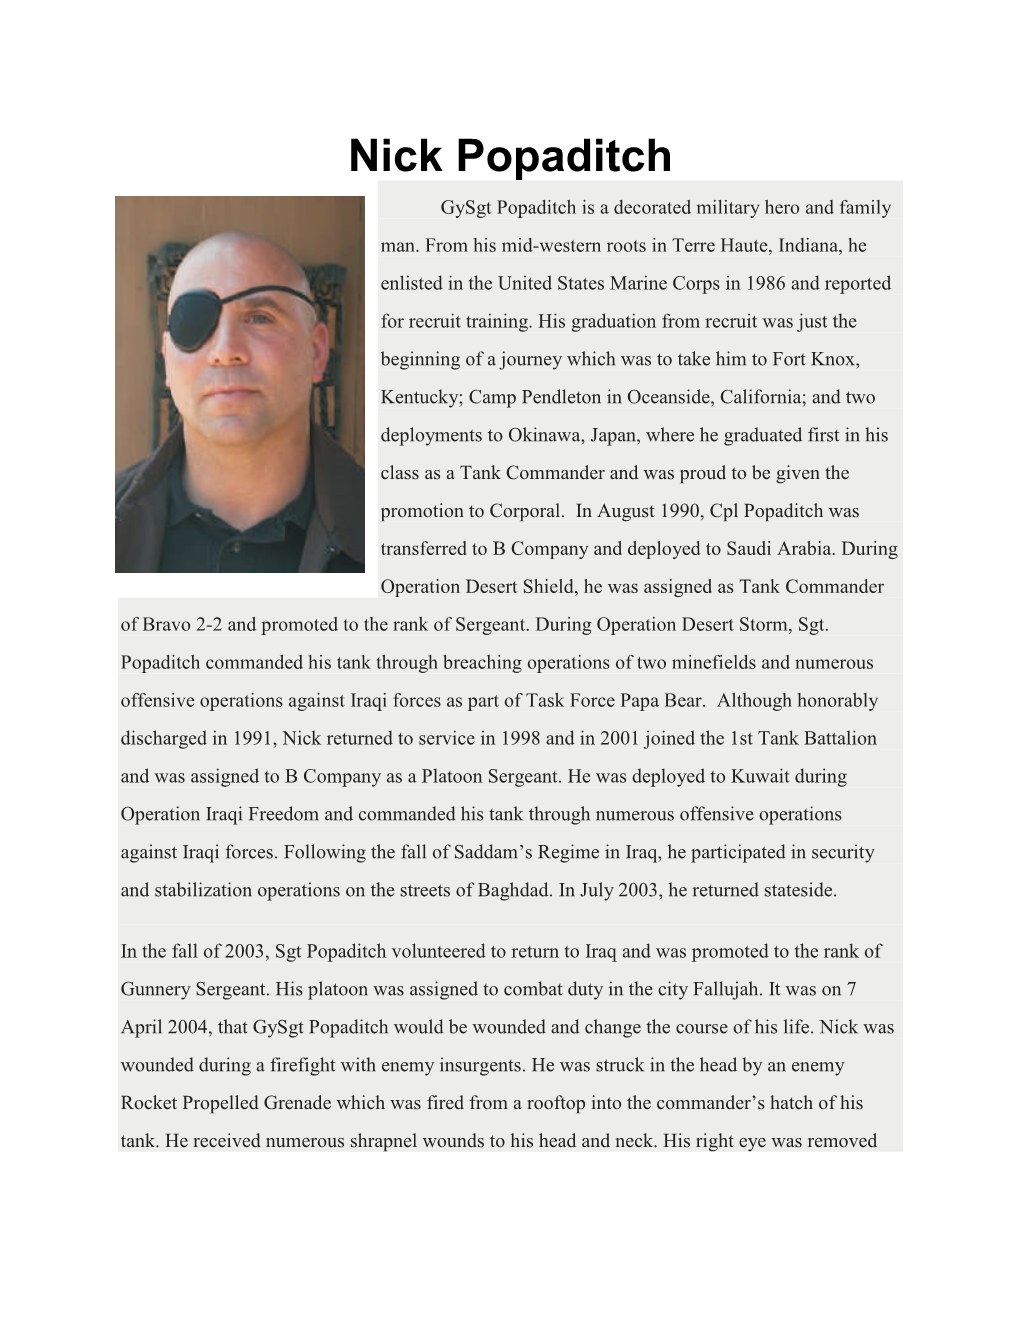 Nick Popaditch Gysgt Popaditch Is a Decorated Military Hero and Family Man